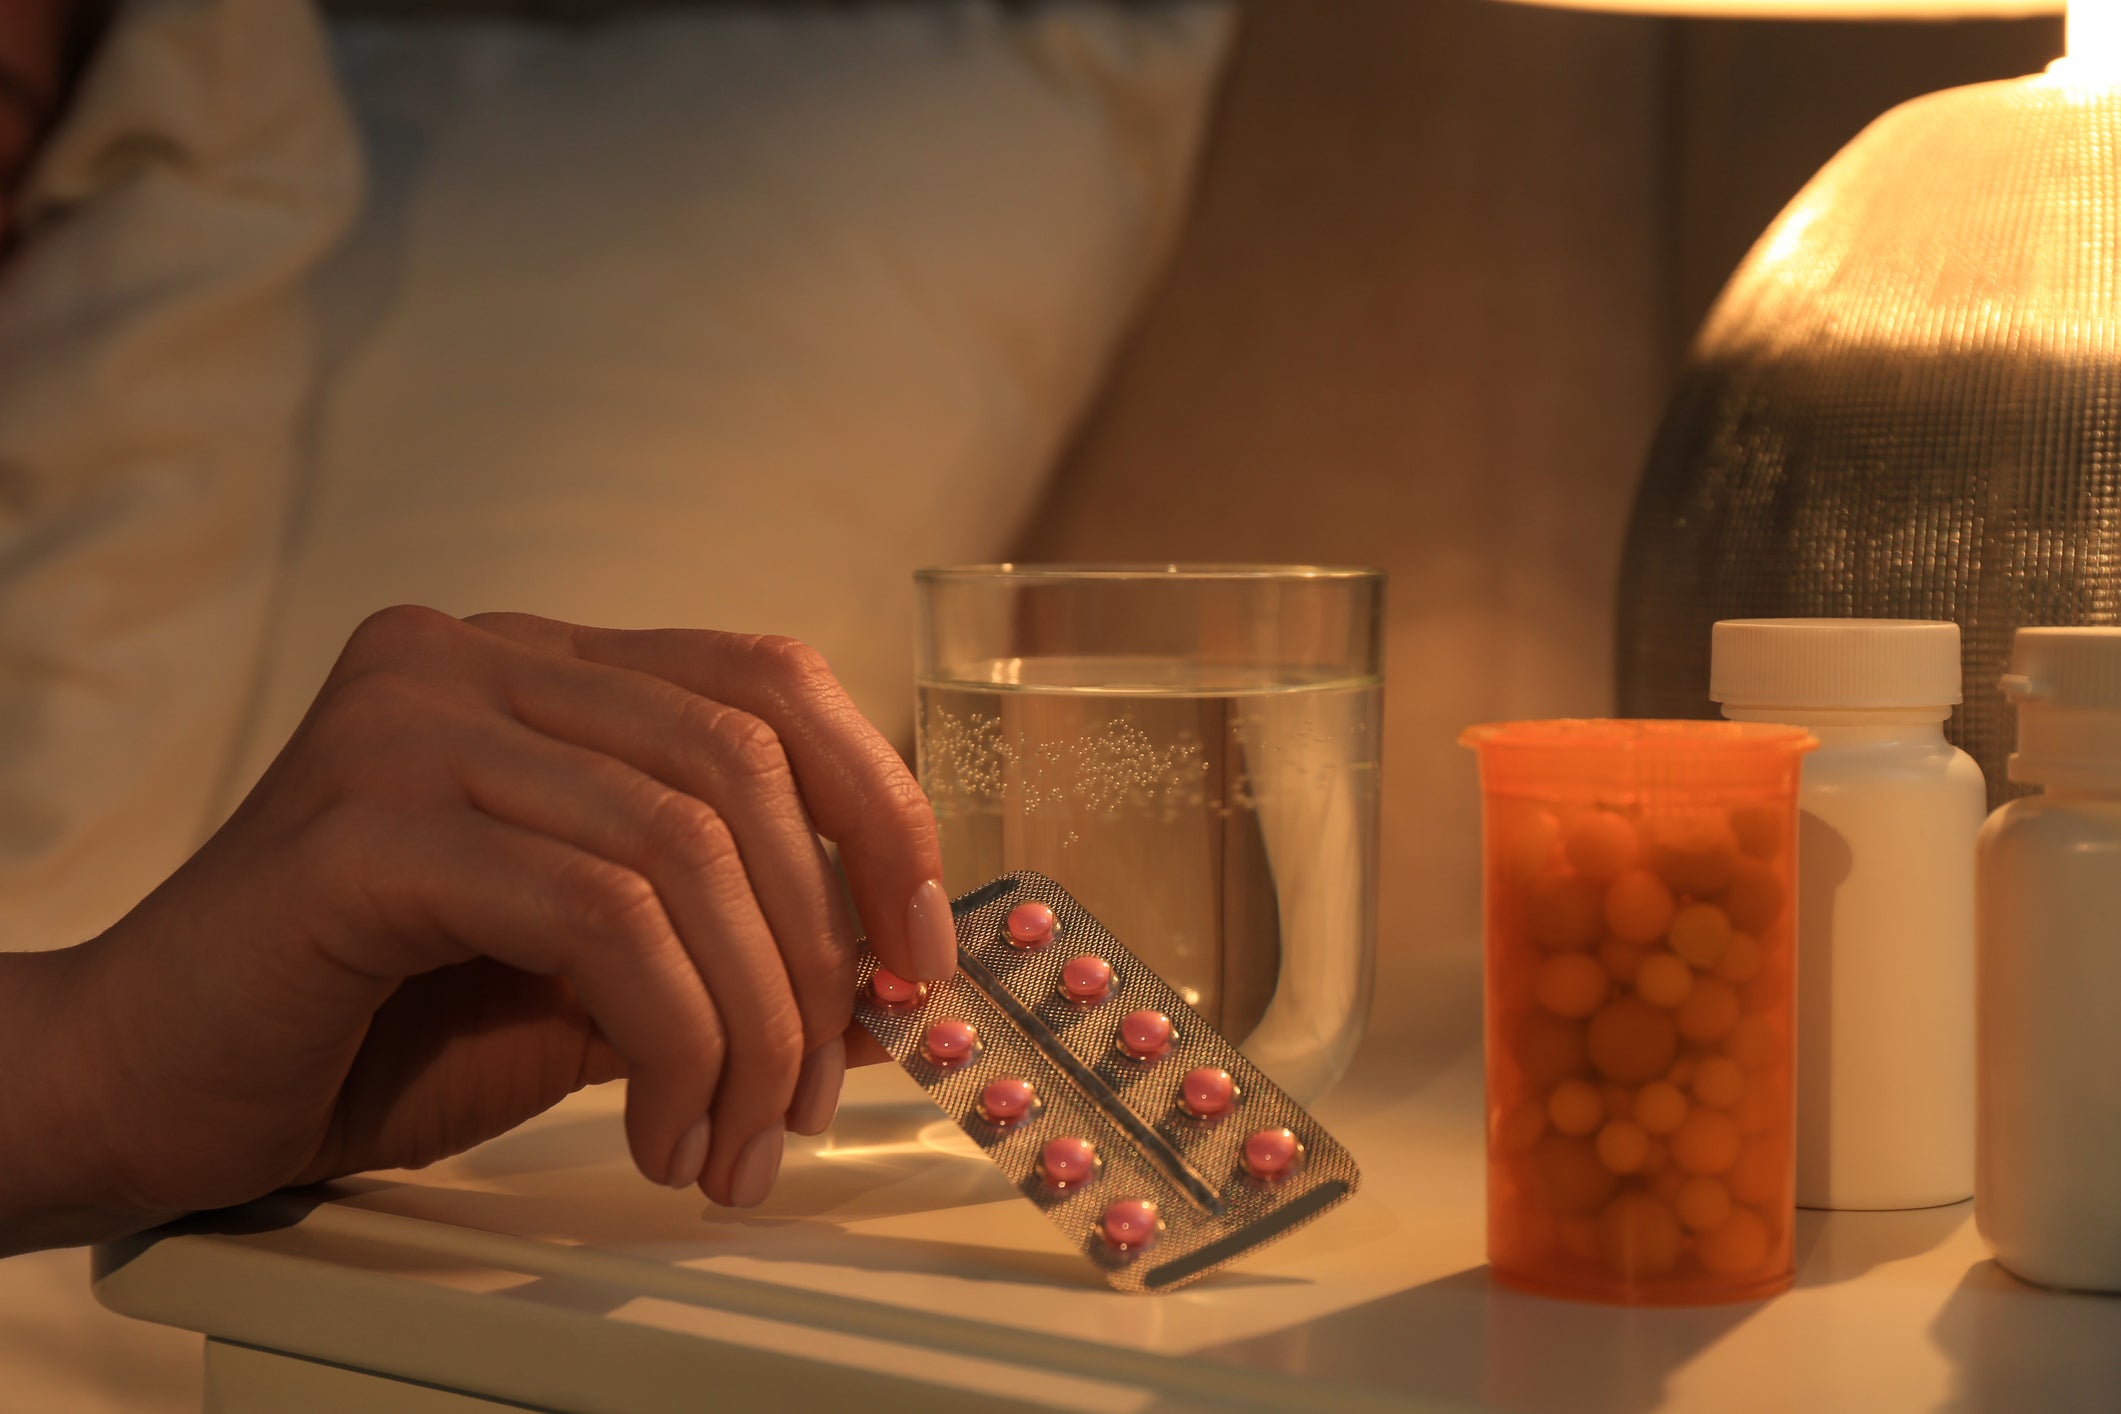 Woman's hand taking pills from bedside table.